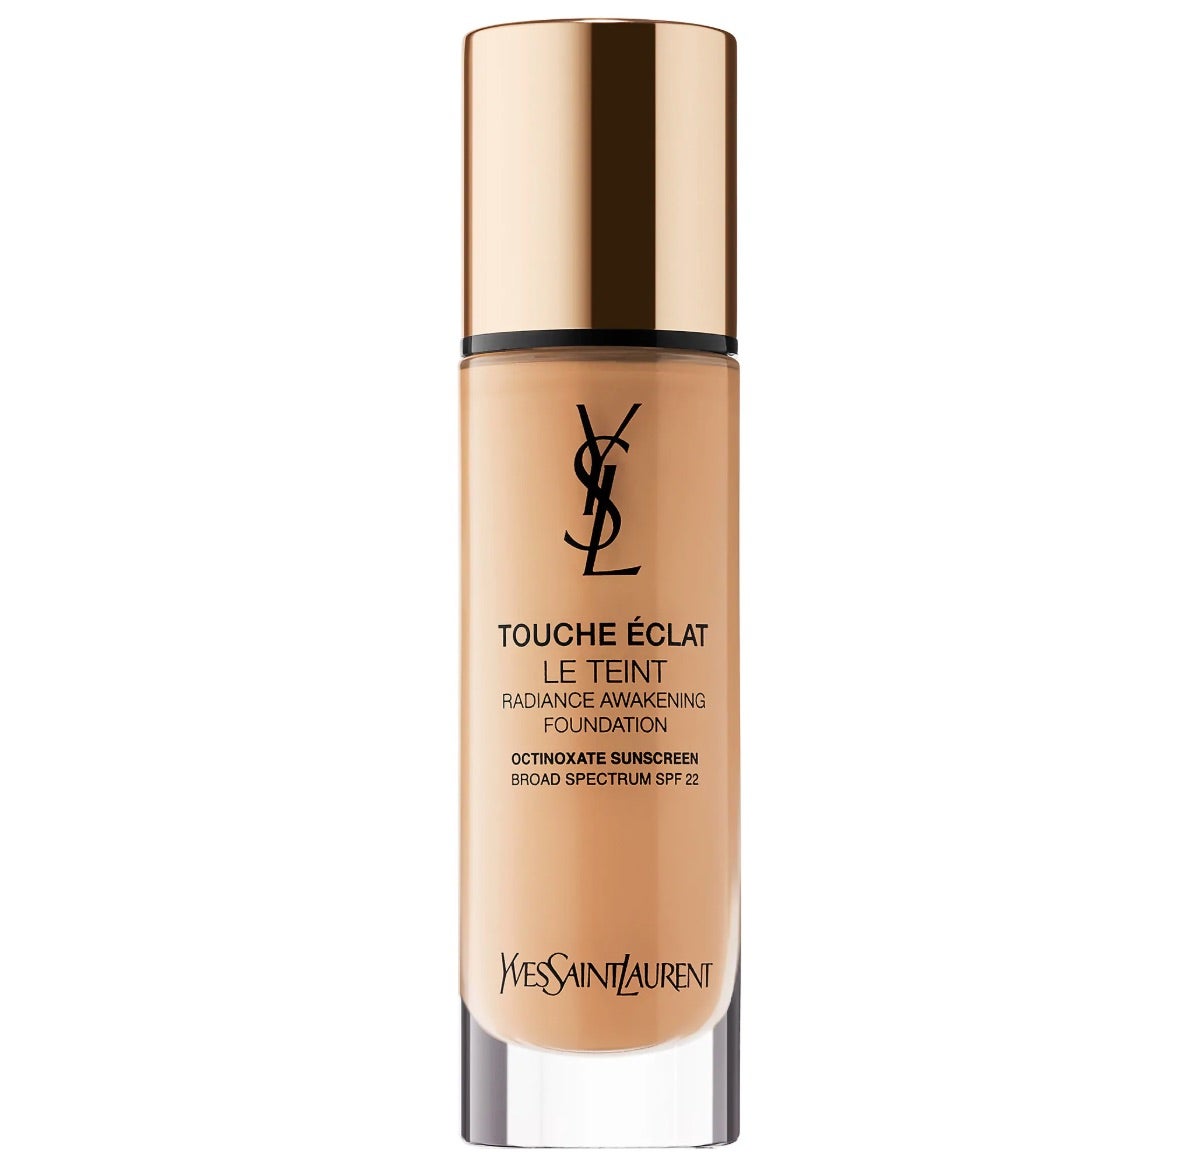 The Best Foundations For Fun In The Sun